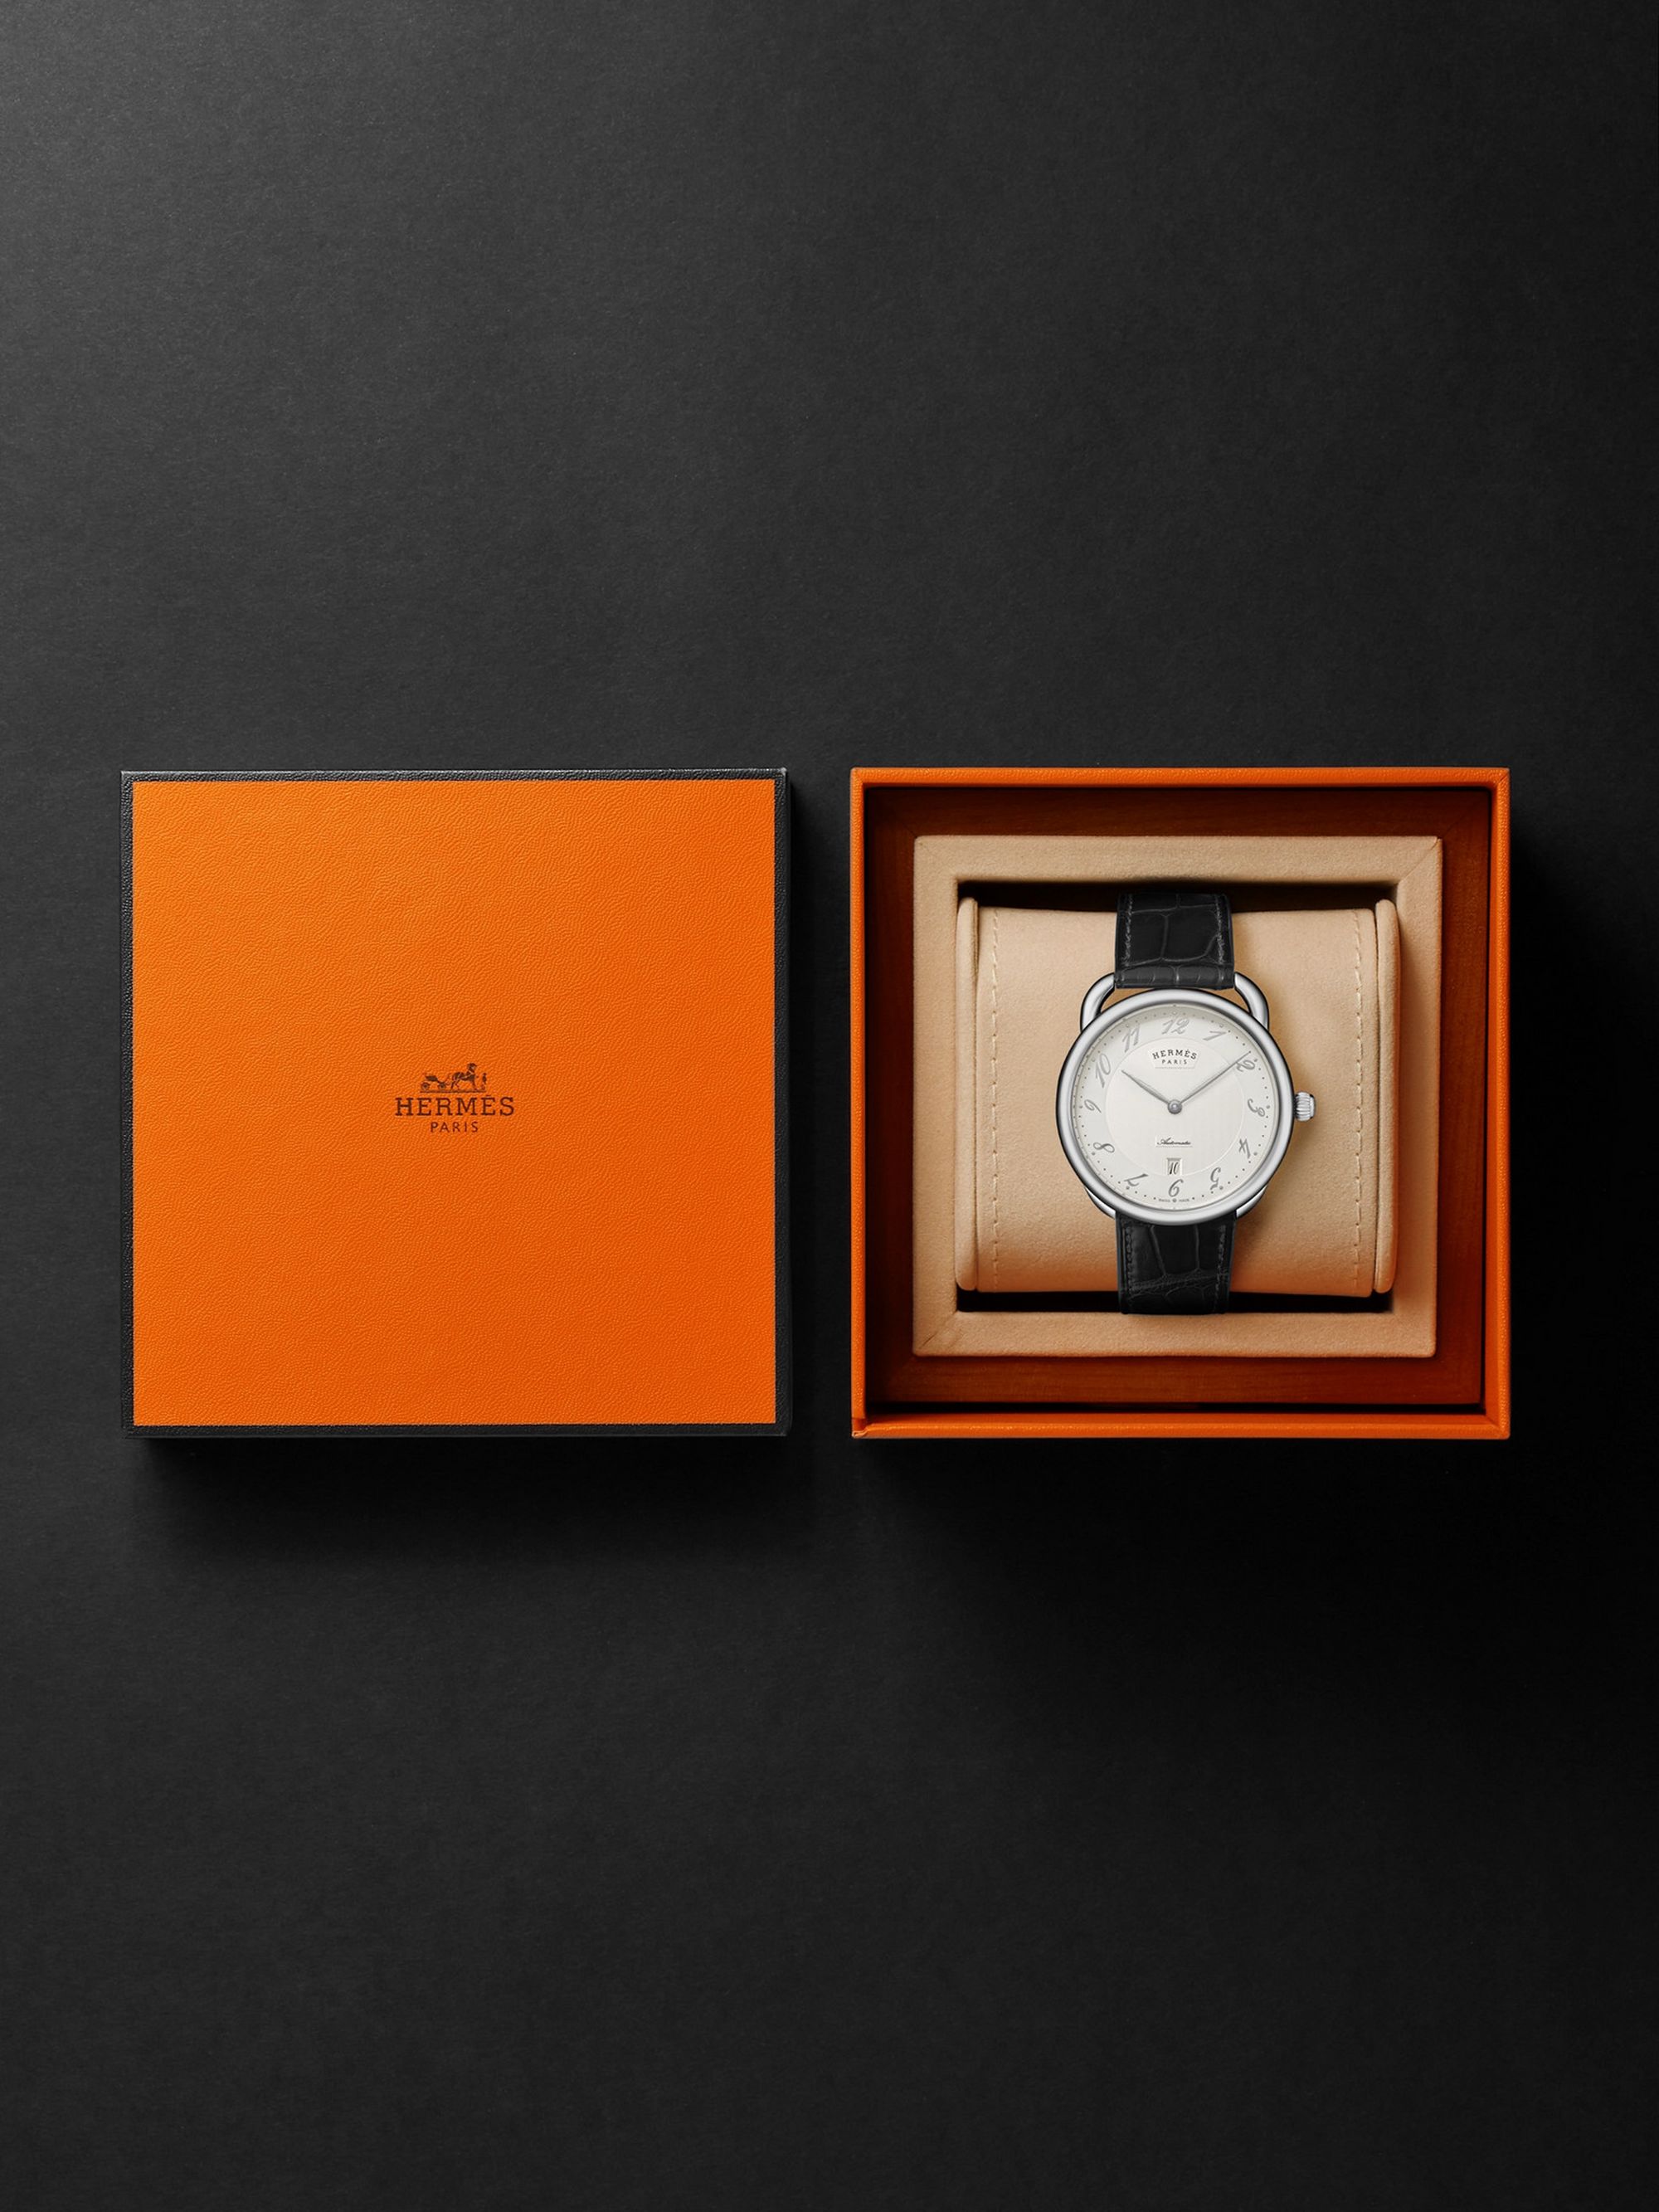 HERMÈS TIMEPIECES Arceau Automatic 40mm Stainless Steel and Alligator Watch, Ref. No. 055574WW00